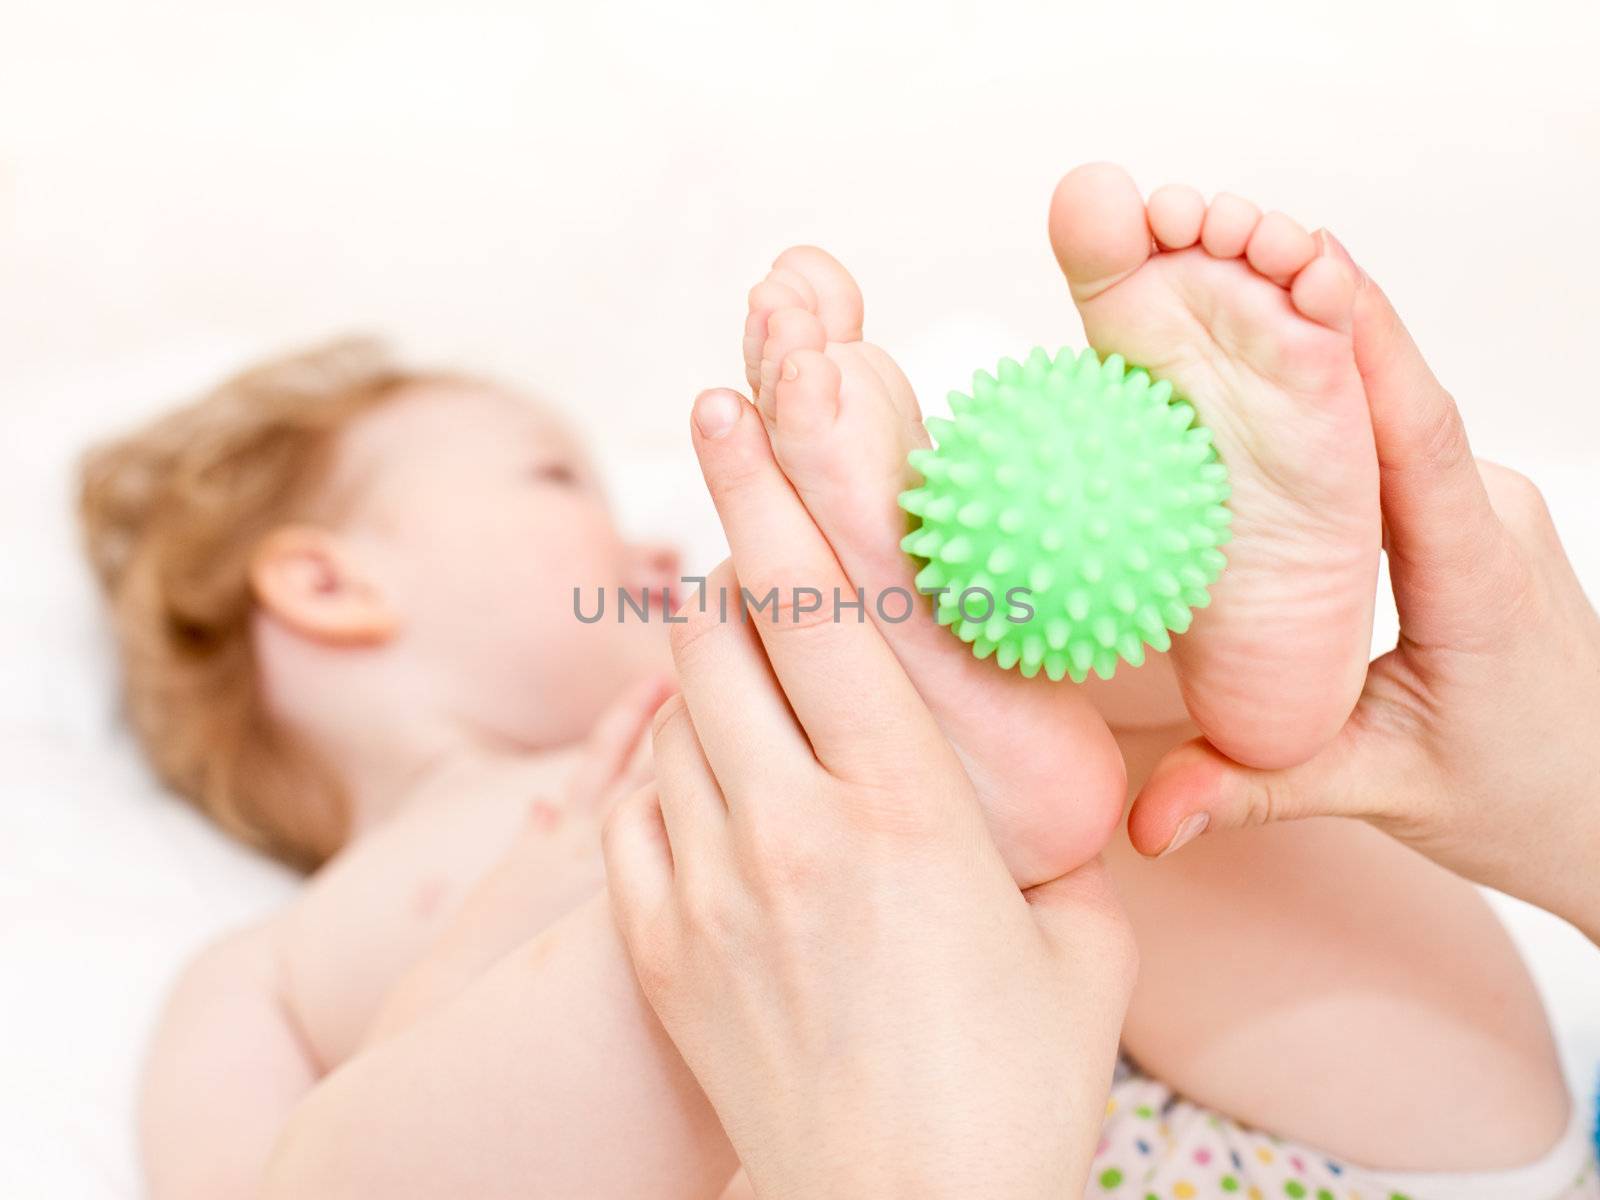 Masseur massaging child's feet with rubber device, shallow focus